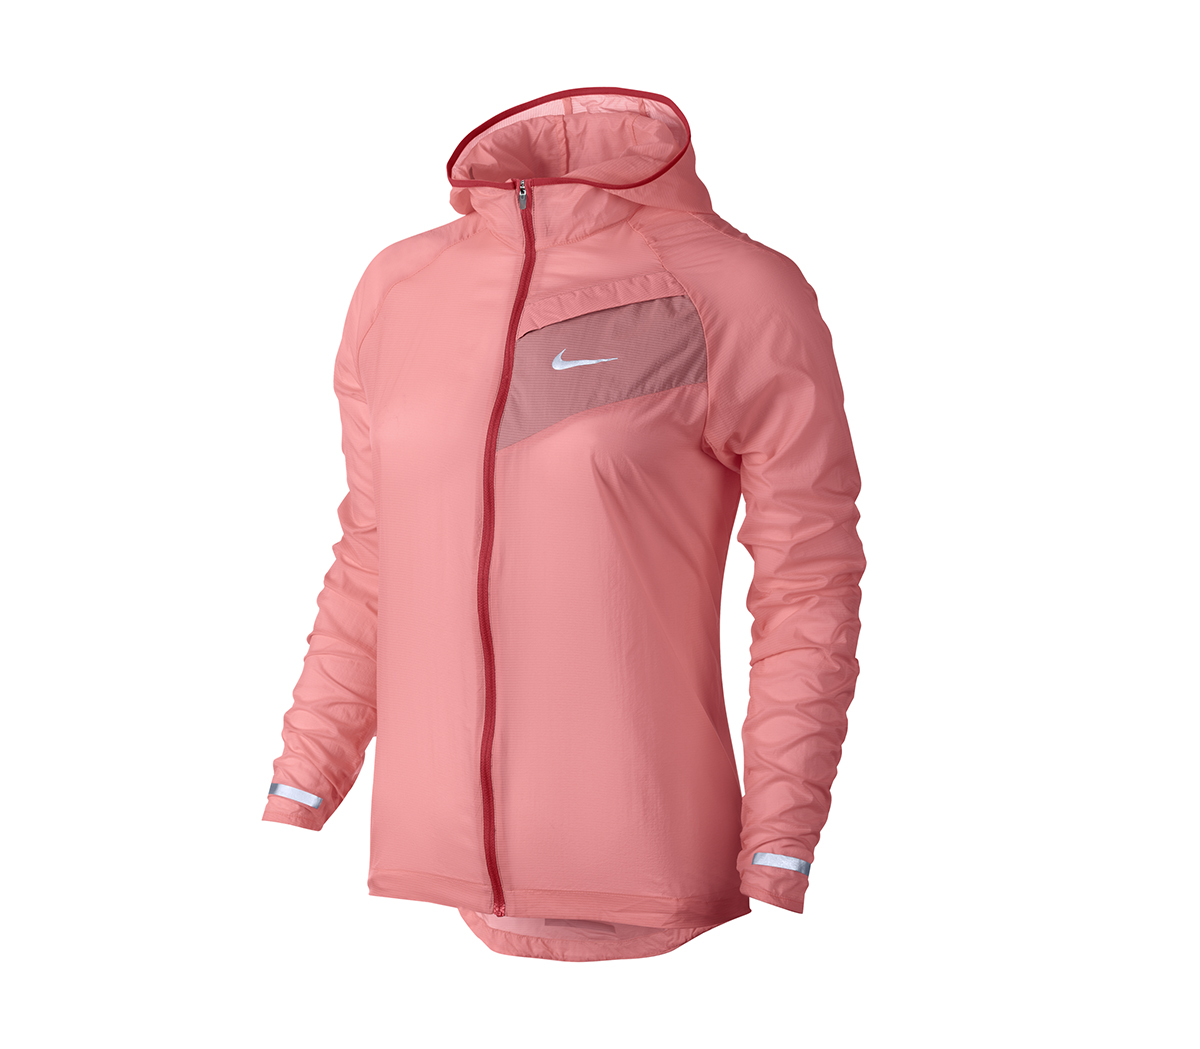 NikeJacket Impossibly Light (w)Sunblush Red Reflective Silver